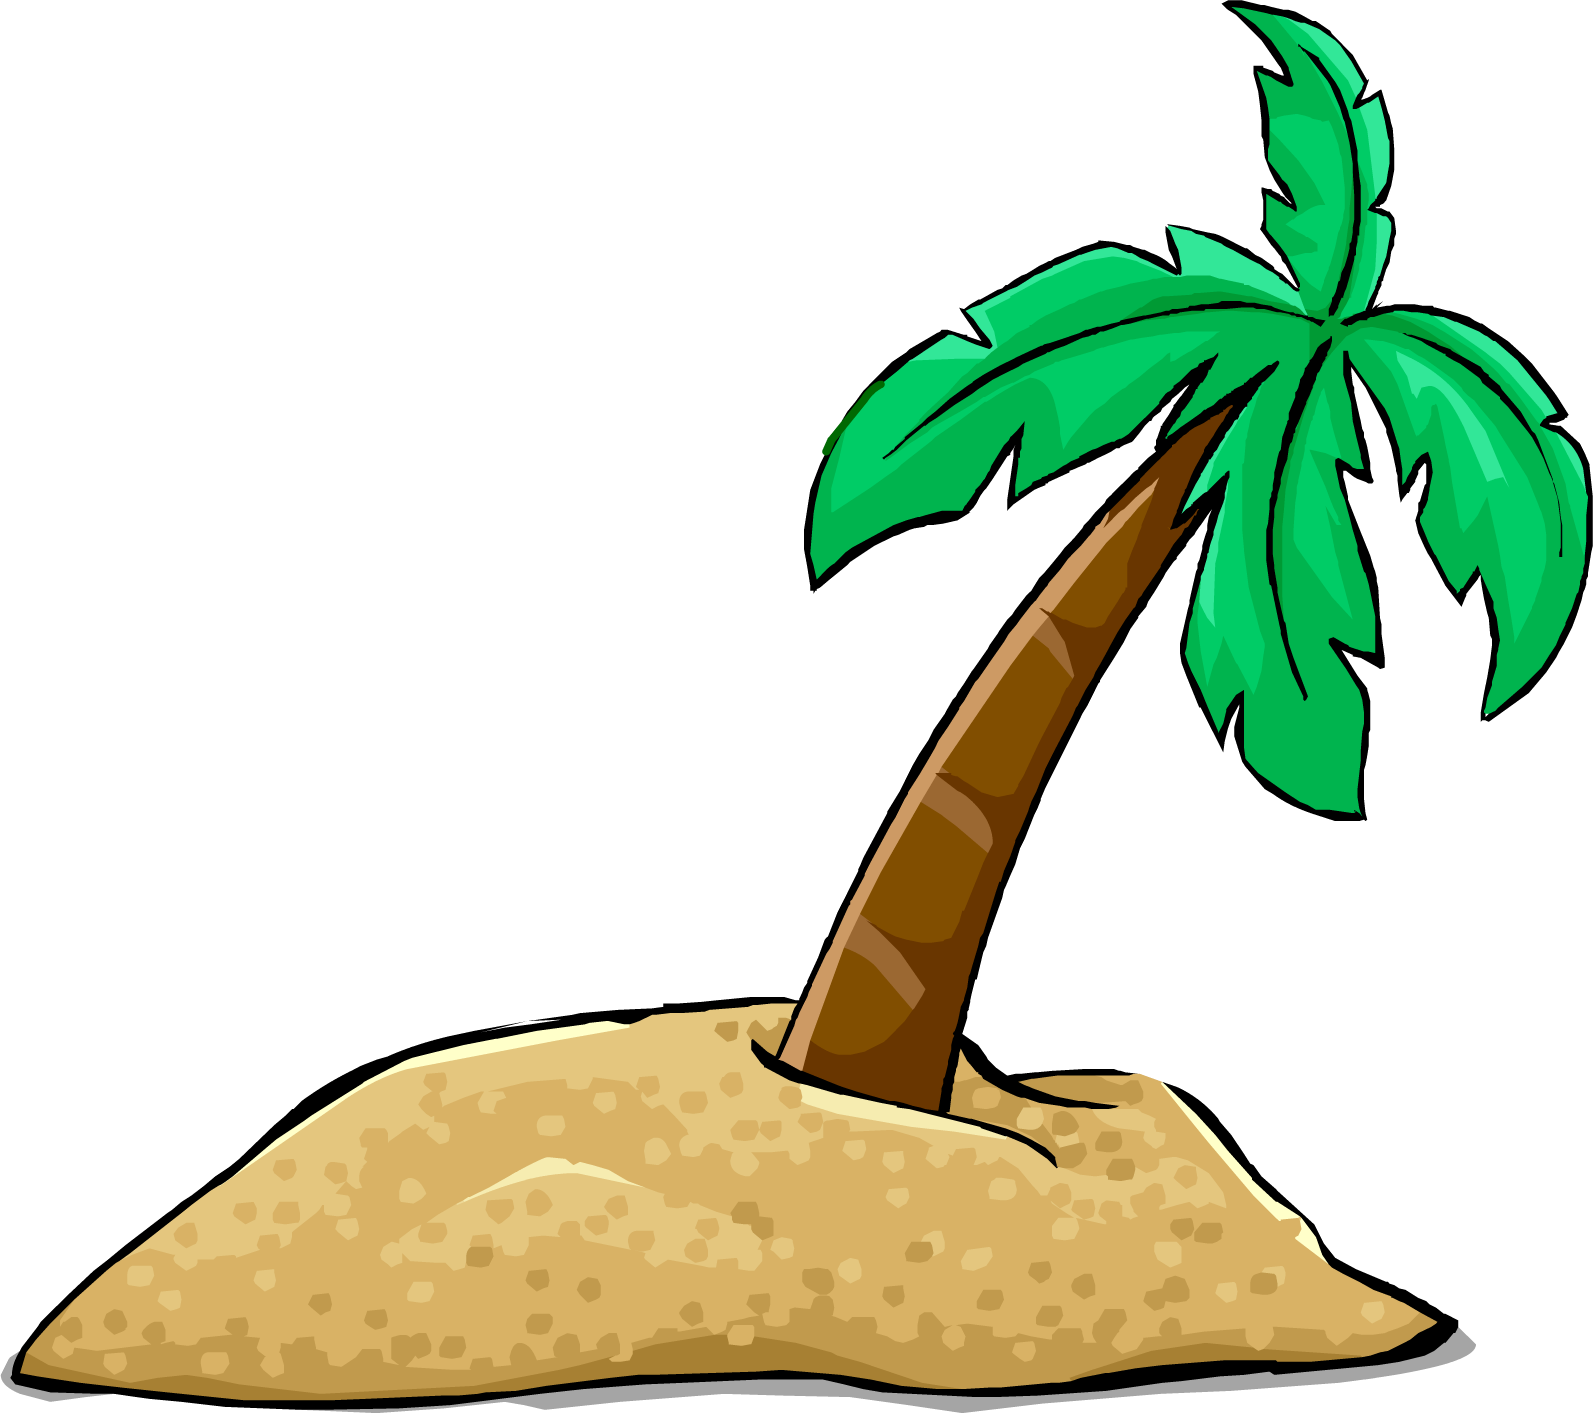 Island PNG HD and HQ Image